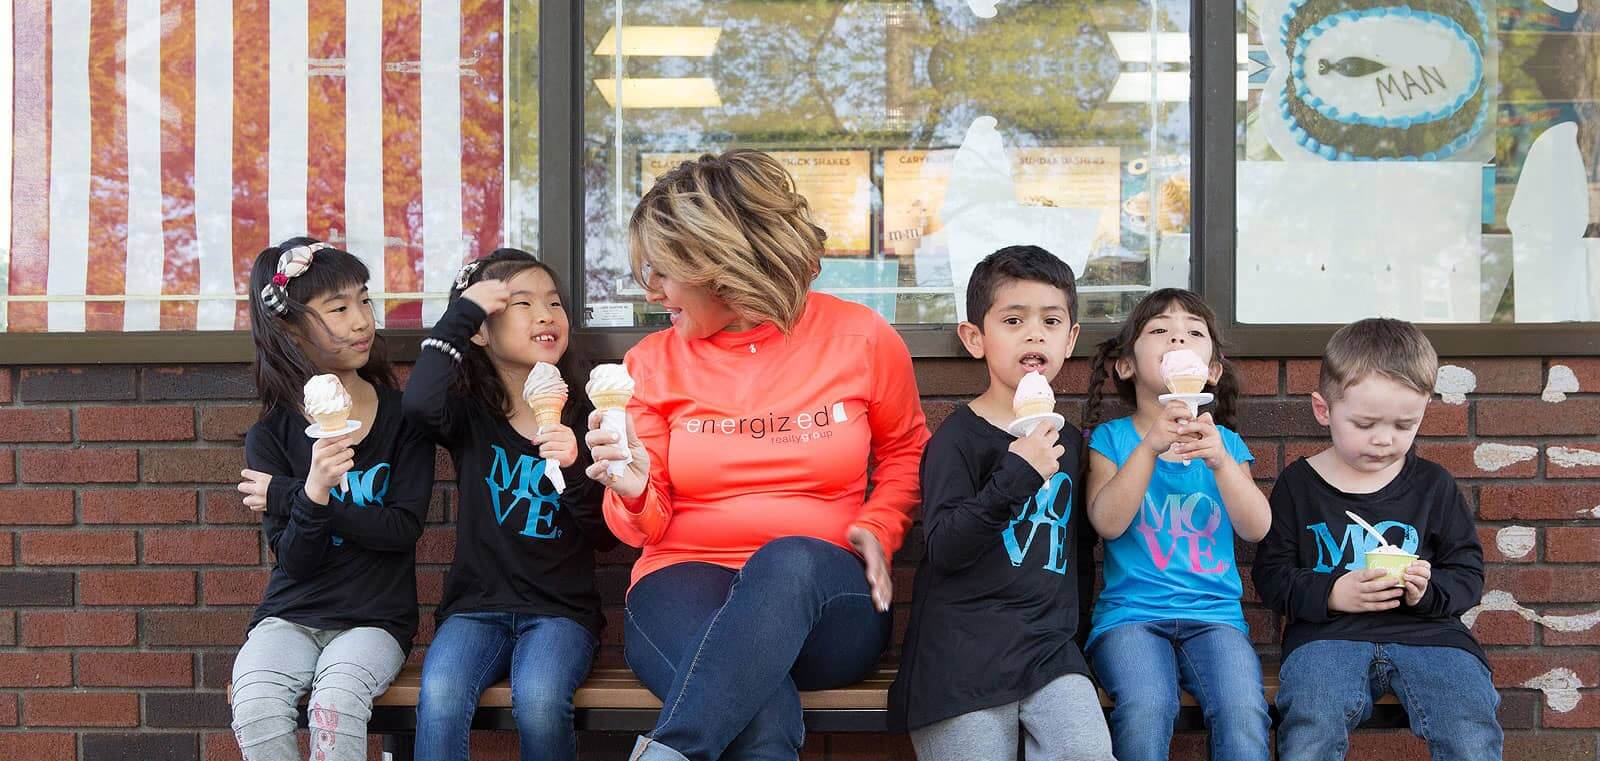 Judy Markowitz with five kids eating vanilla ice cream sitting in a bench outside the ice cream store